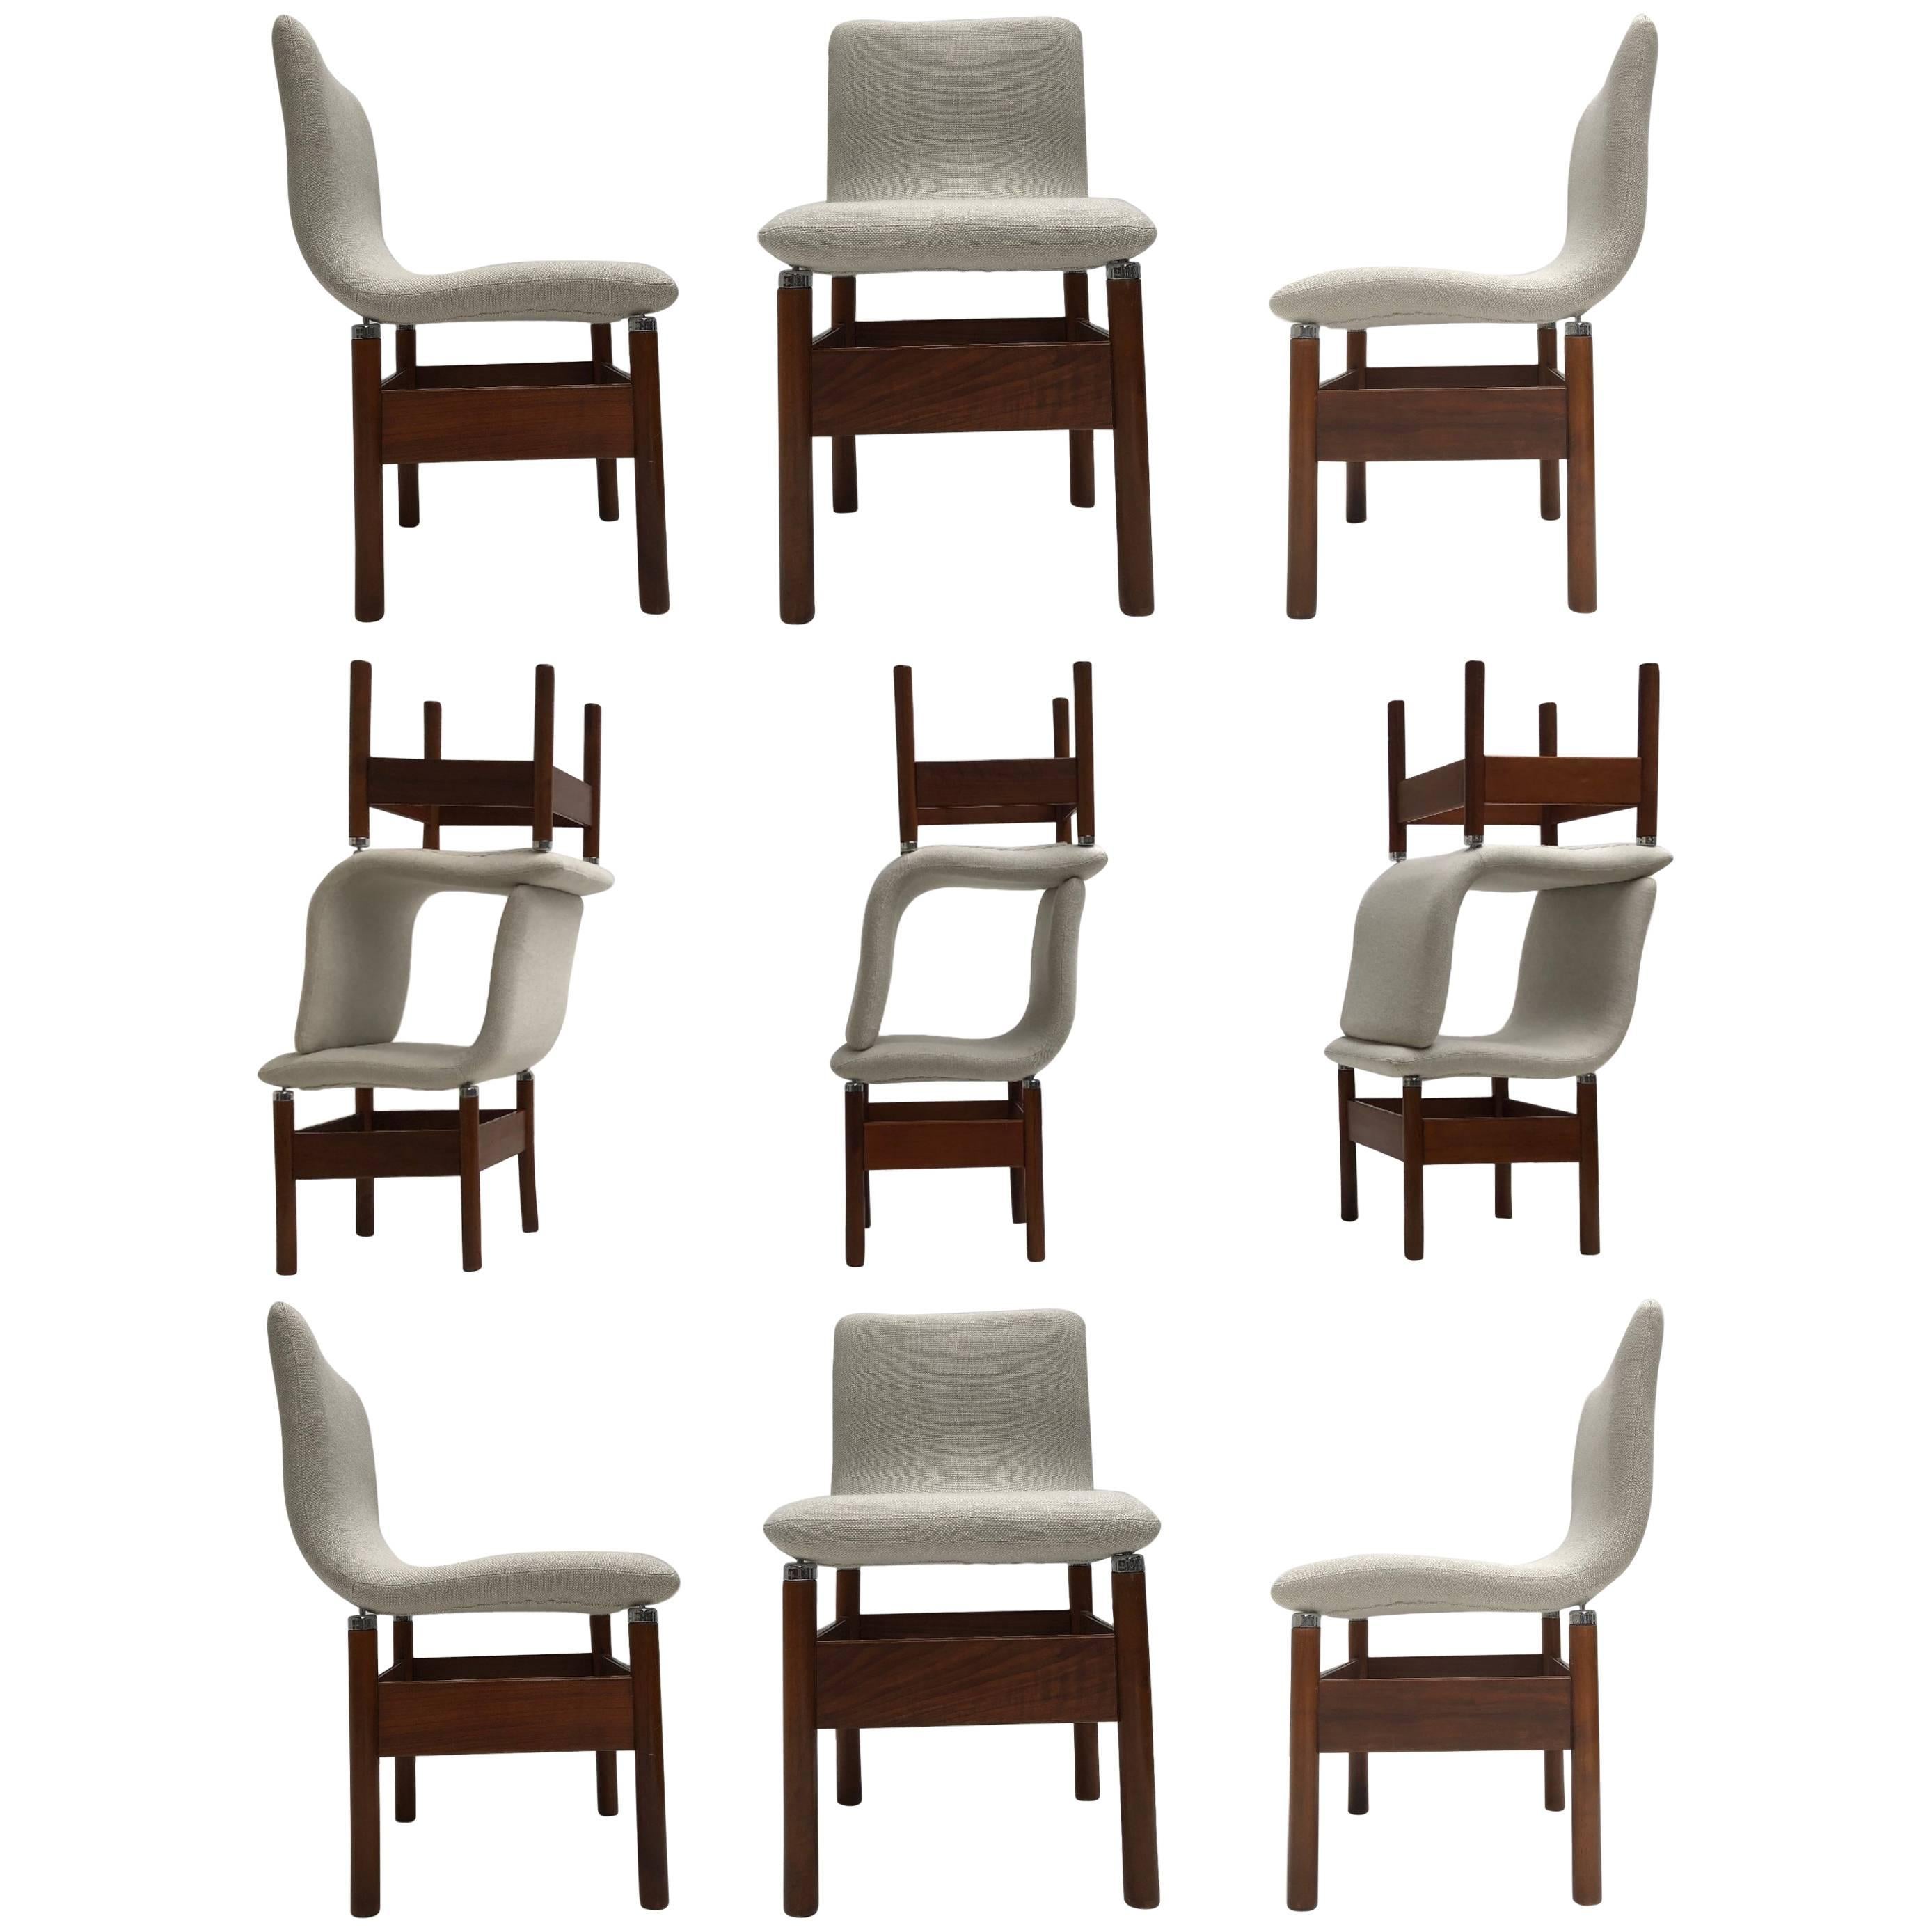 12 'Chelsea' Dining Chairs by Introini, Saporiti 1966, Upholstery Fully Restored